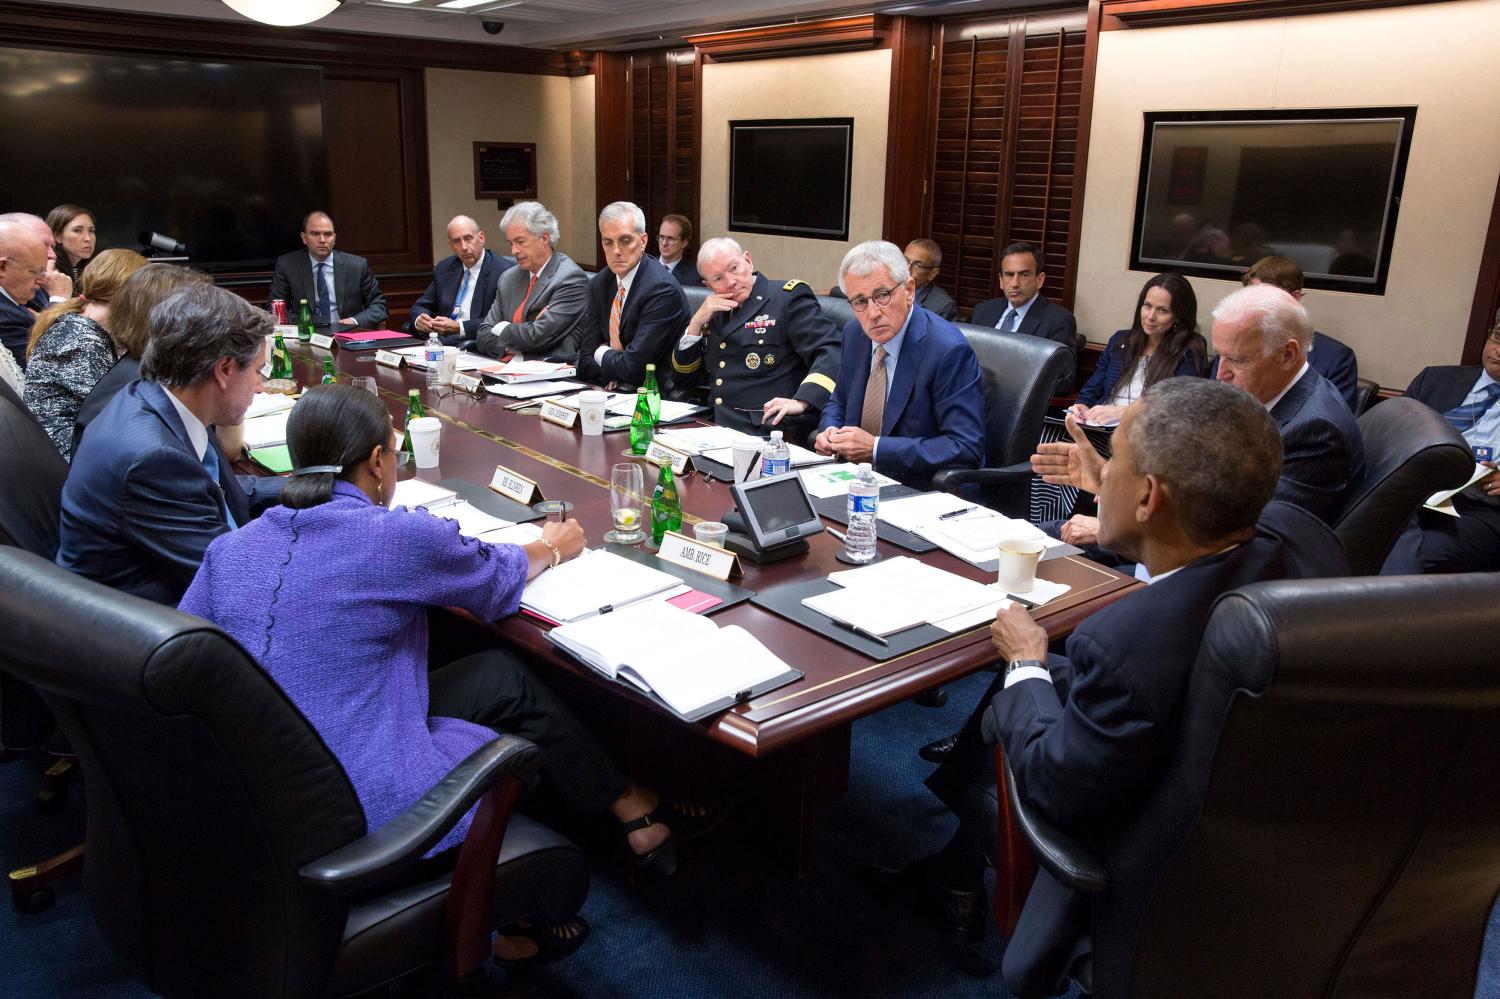 President Barack Obama (2nd R) and Vice President Joe Biden (R) meet with members of the National Security Council in the Situation Room of the White House in Washington September 10, 2014. Obama, who will set out a broad long-term strategy to defeat the Islamic State in a speech to Americans on Wednesday evening, is prepared to authorize air strikes against the group in Syria, U.S. officials said. REUTERS/The White House/Pete Souza/Handout via Reuters (UNITED STATES - Tags: POLITICS) THIS IMAGE HAS BEEN SUPPLIED BY A THIRD PARTY. IT IS DISTRIBUTED, EXACTLY AS RECEIVED BY REUTERS, AS A SERVICE TO CLIENTS. FOR EDITORIAL USE ONLY. NOT FOR SALE FOR MARKETING OR ADVERTISING CAMPAIGNS - RTR45QKO